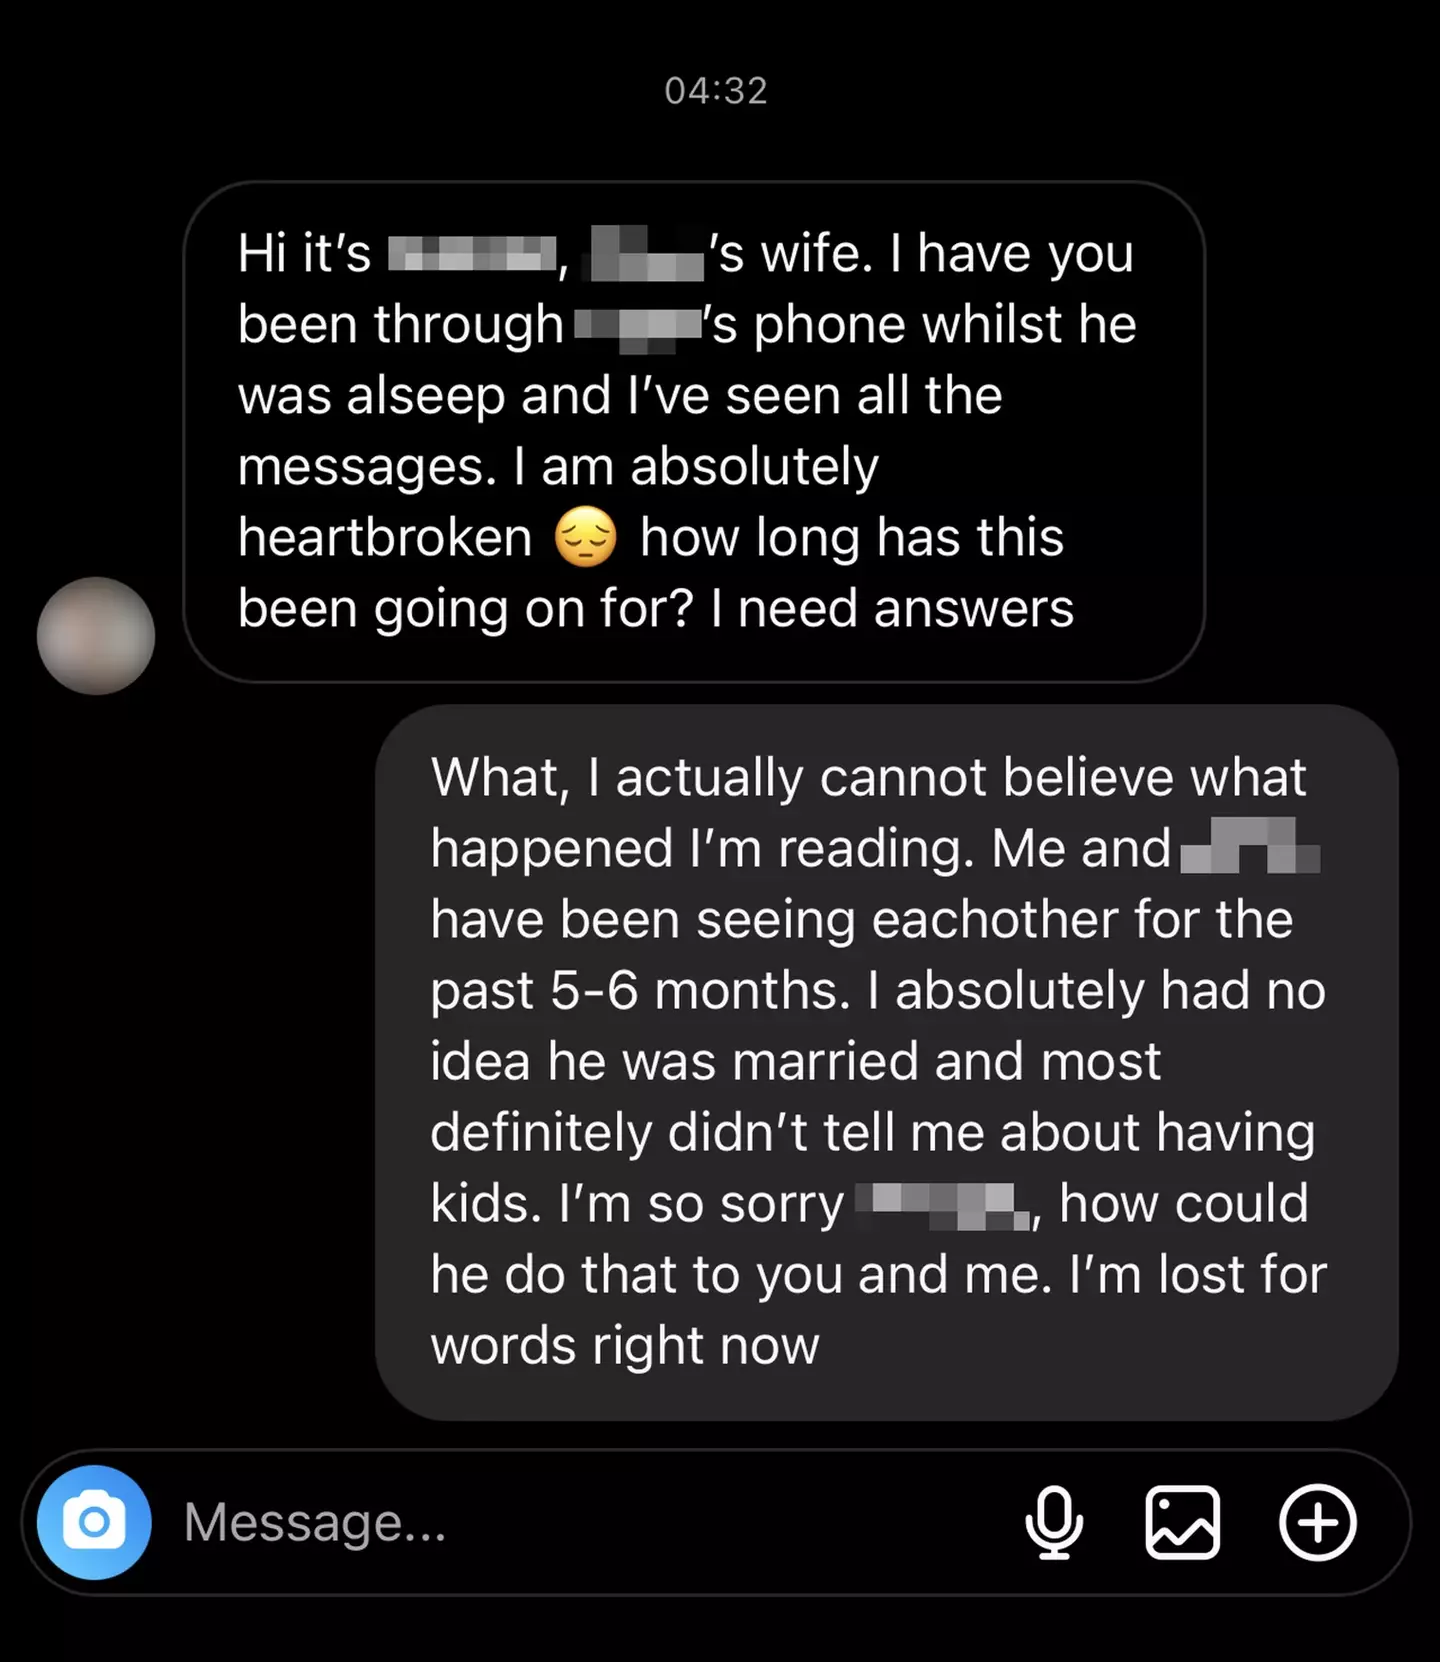 Josh was contacted by his boyfriend's wife.